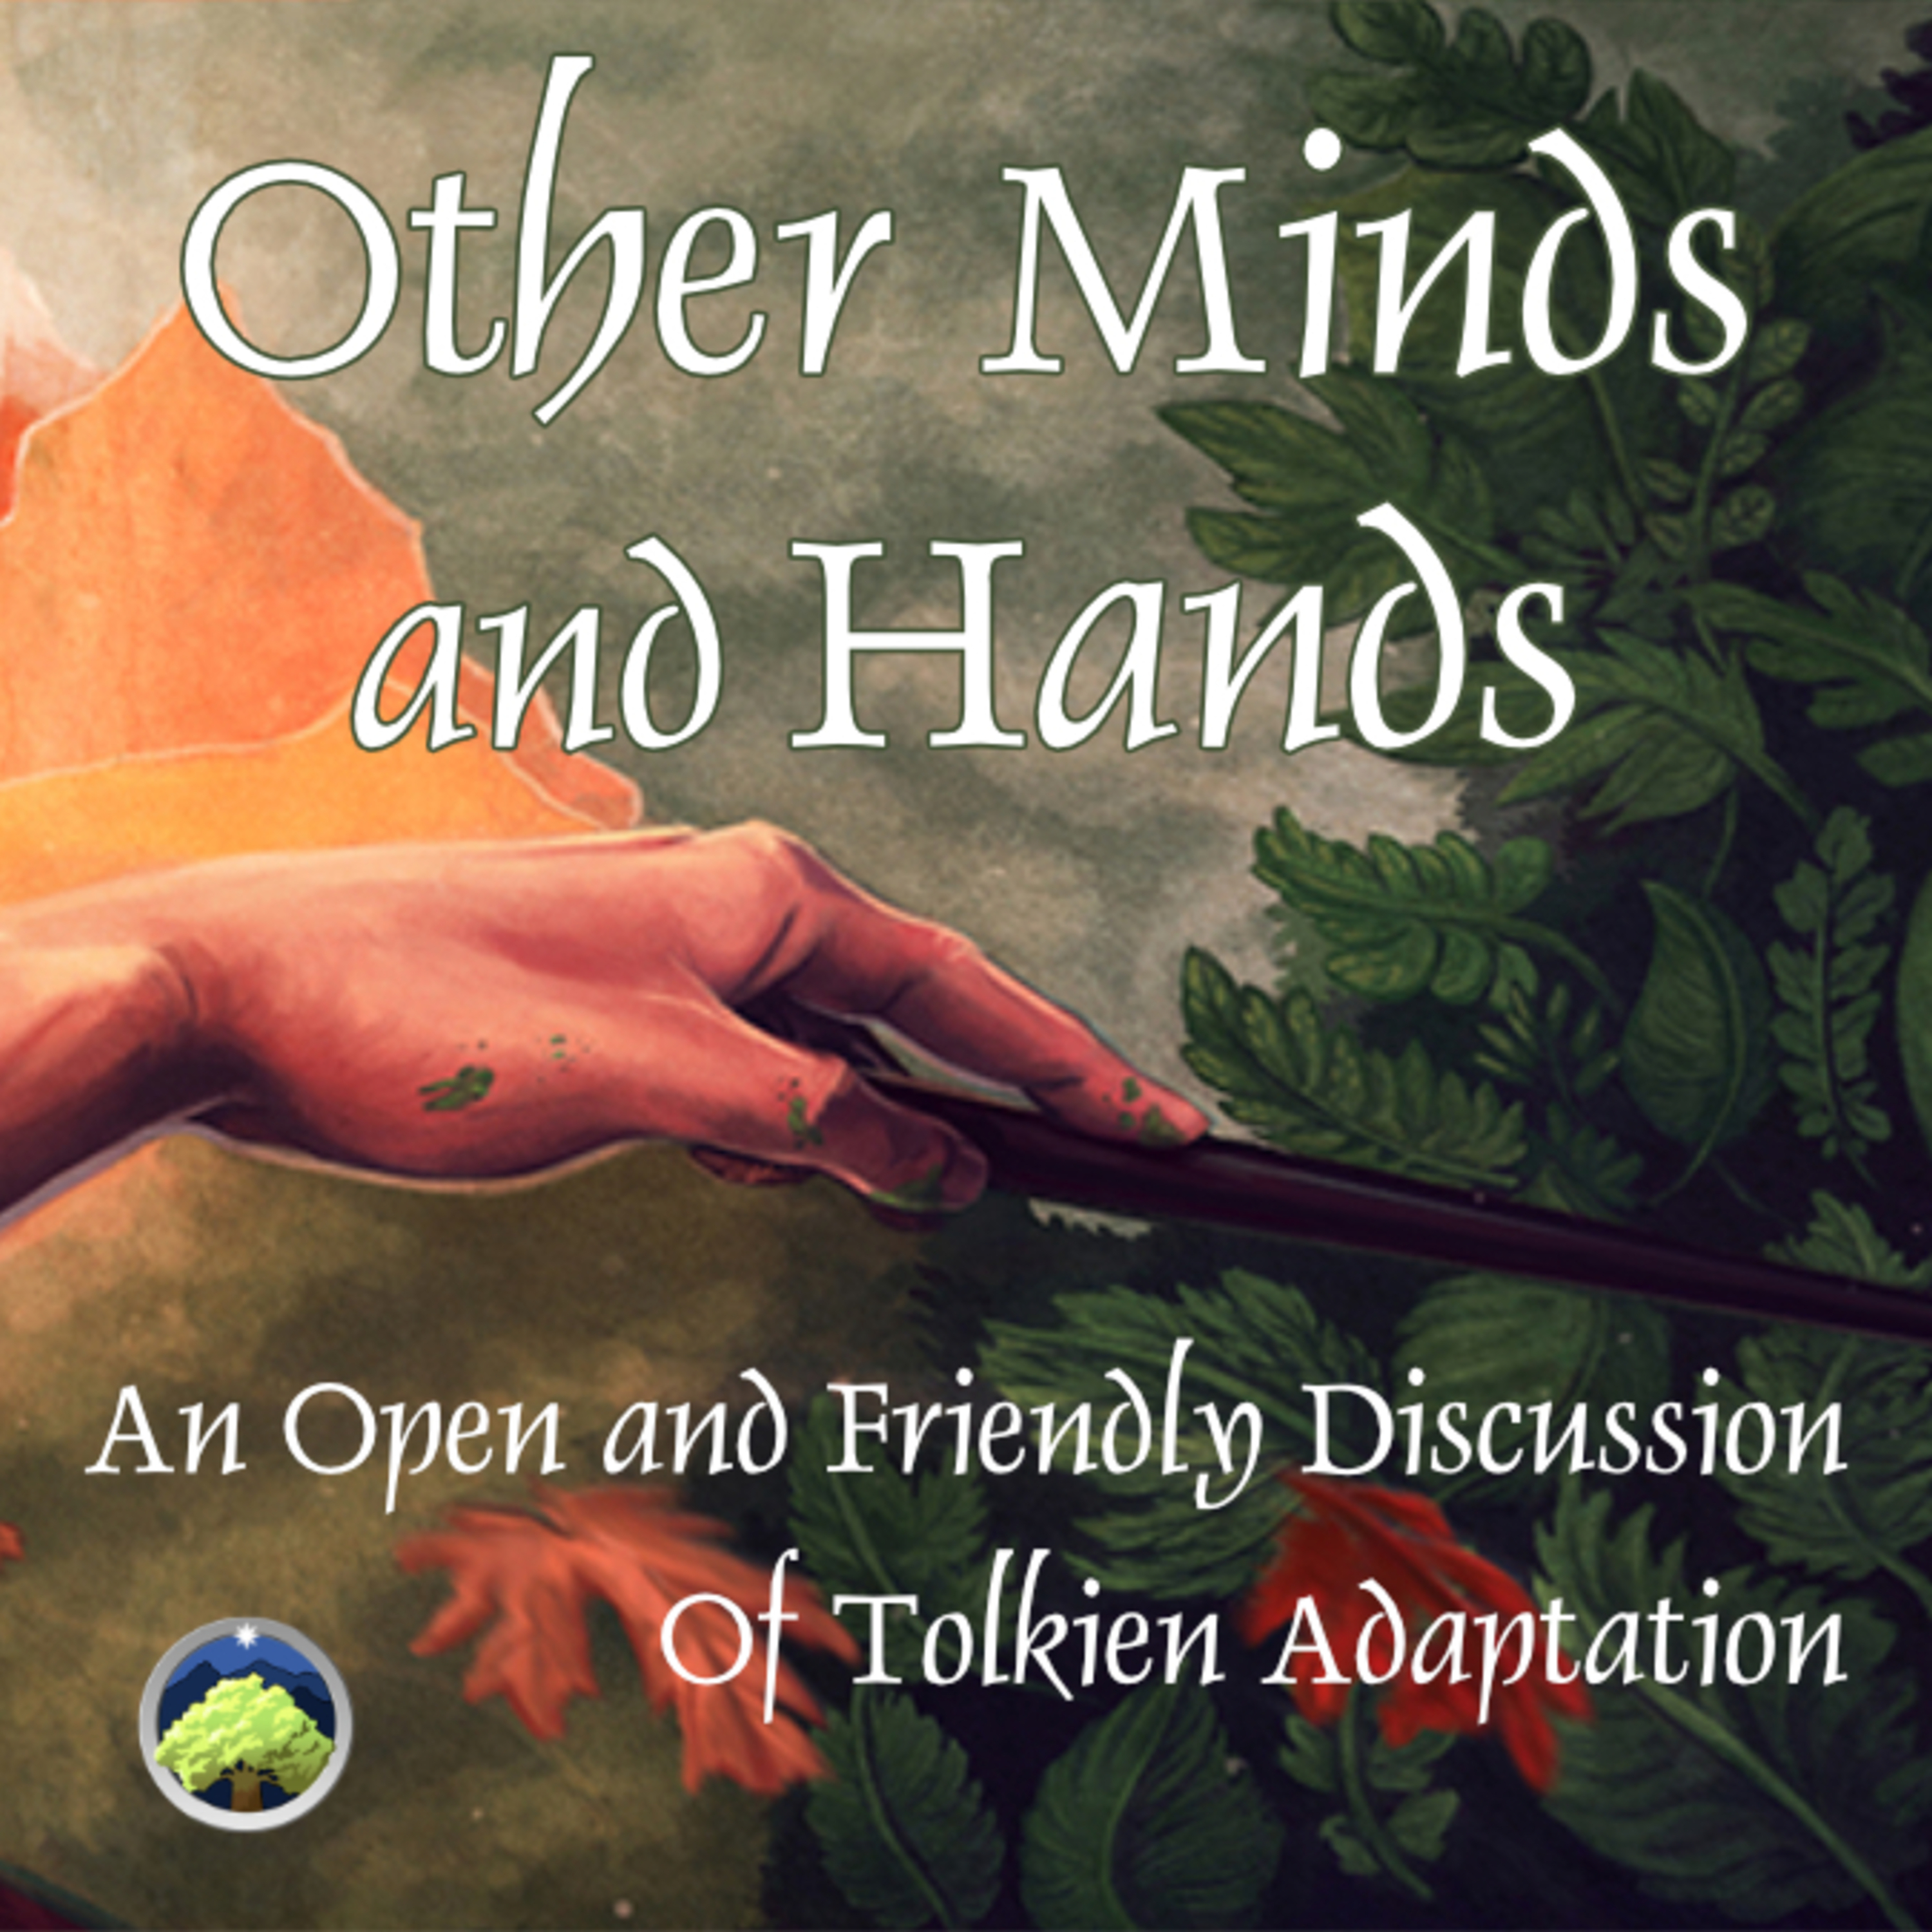 551: Other Minds and Hands, Episode 58